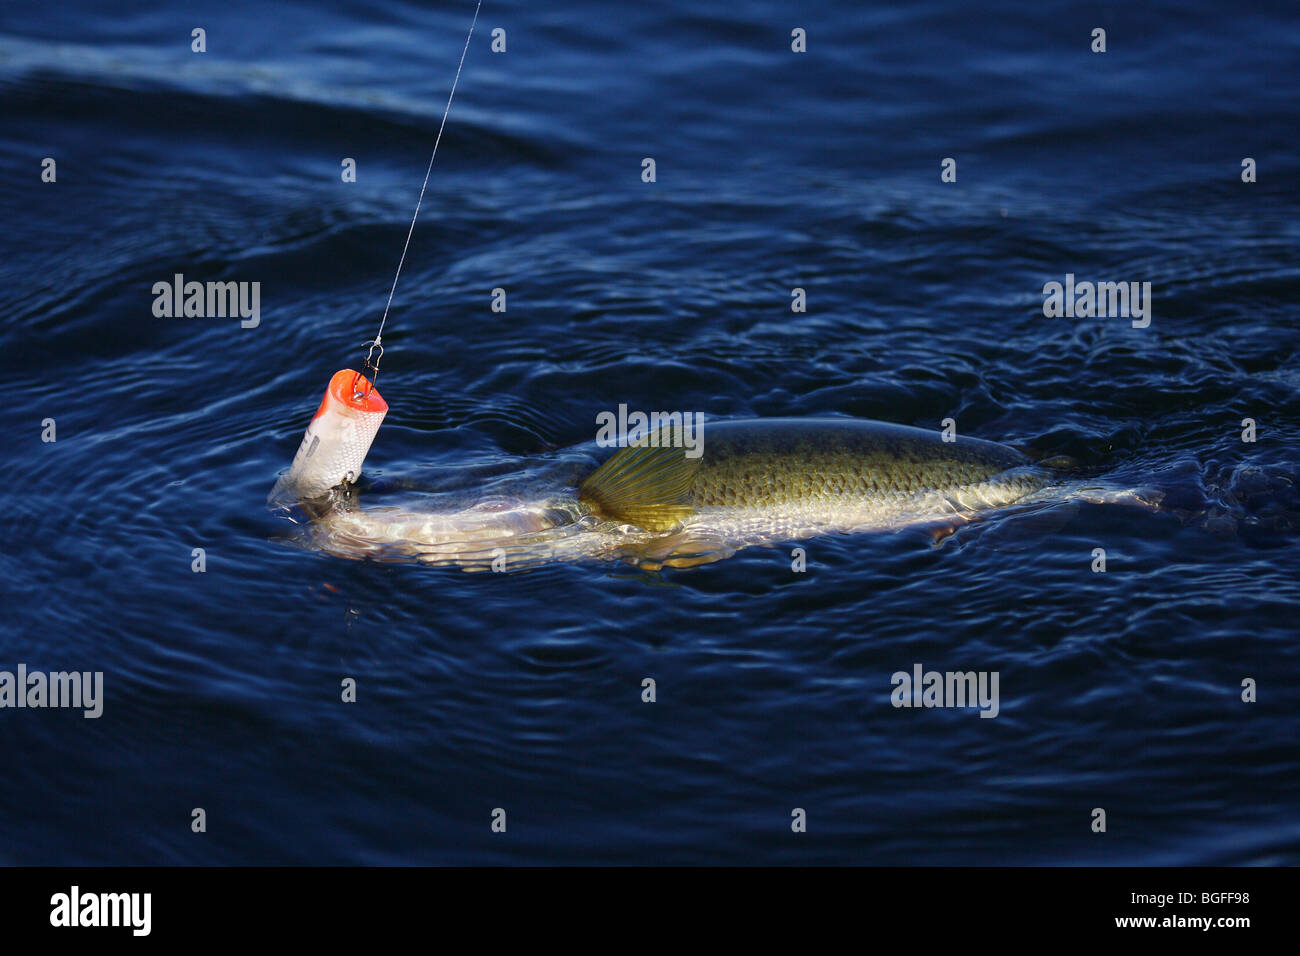 https://c8.alamy.com/comp/BGFF98/large-mouth-bass-with-heddon-chugger-spook-lure-in-mouth-being-landed-BGFF98.jpg